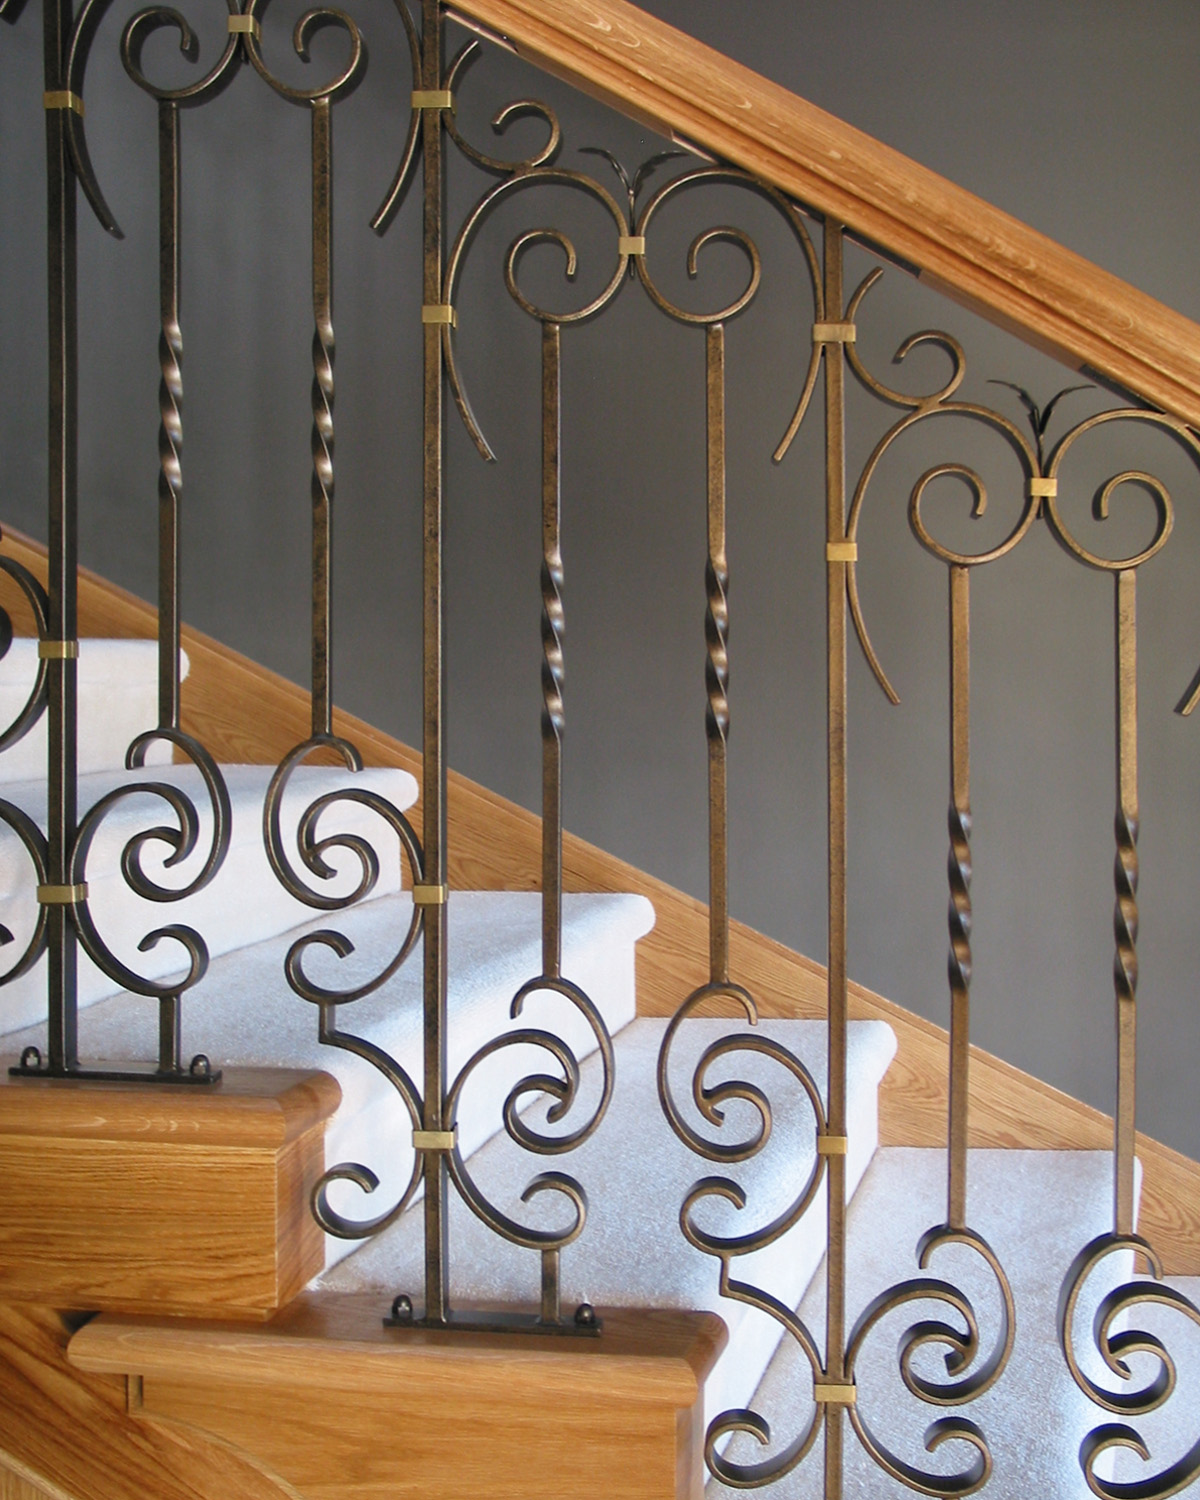 Handcrafted wrought iron balustrade